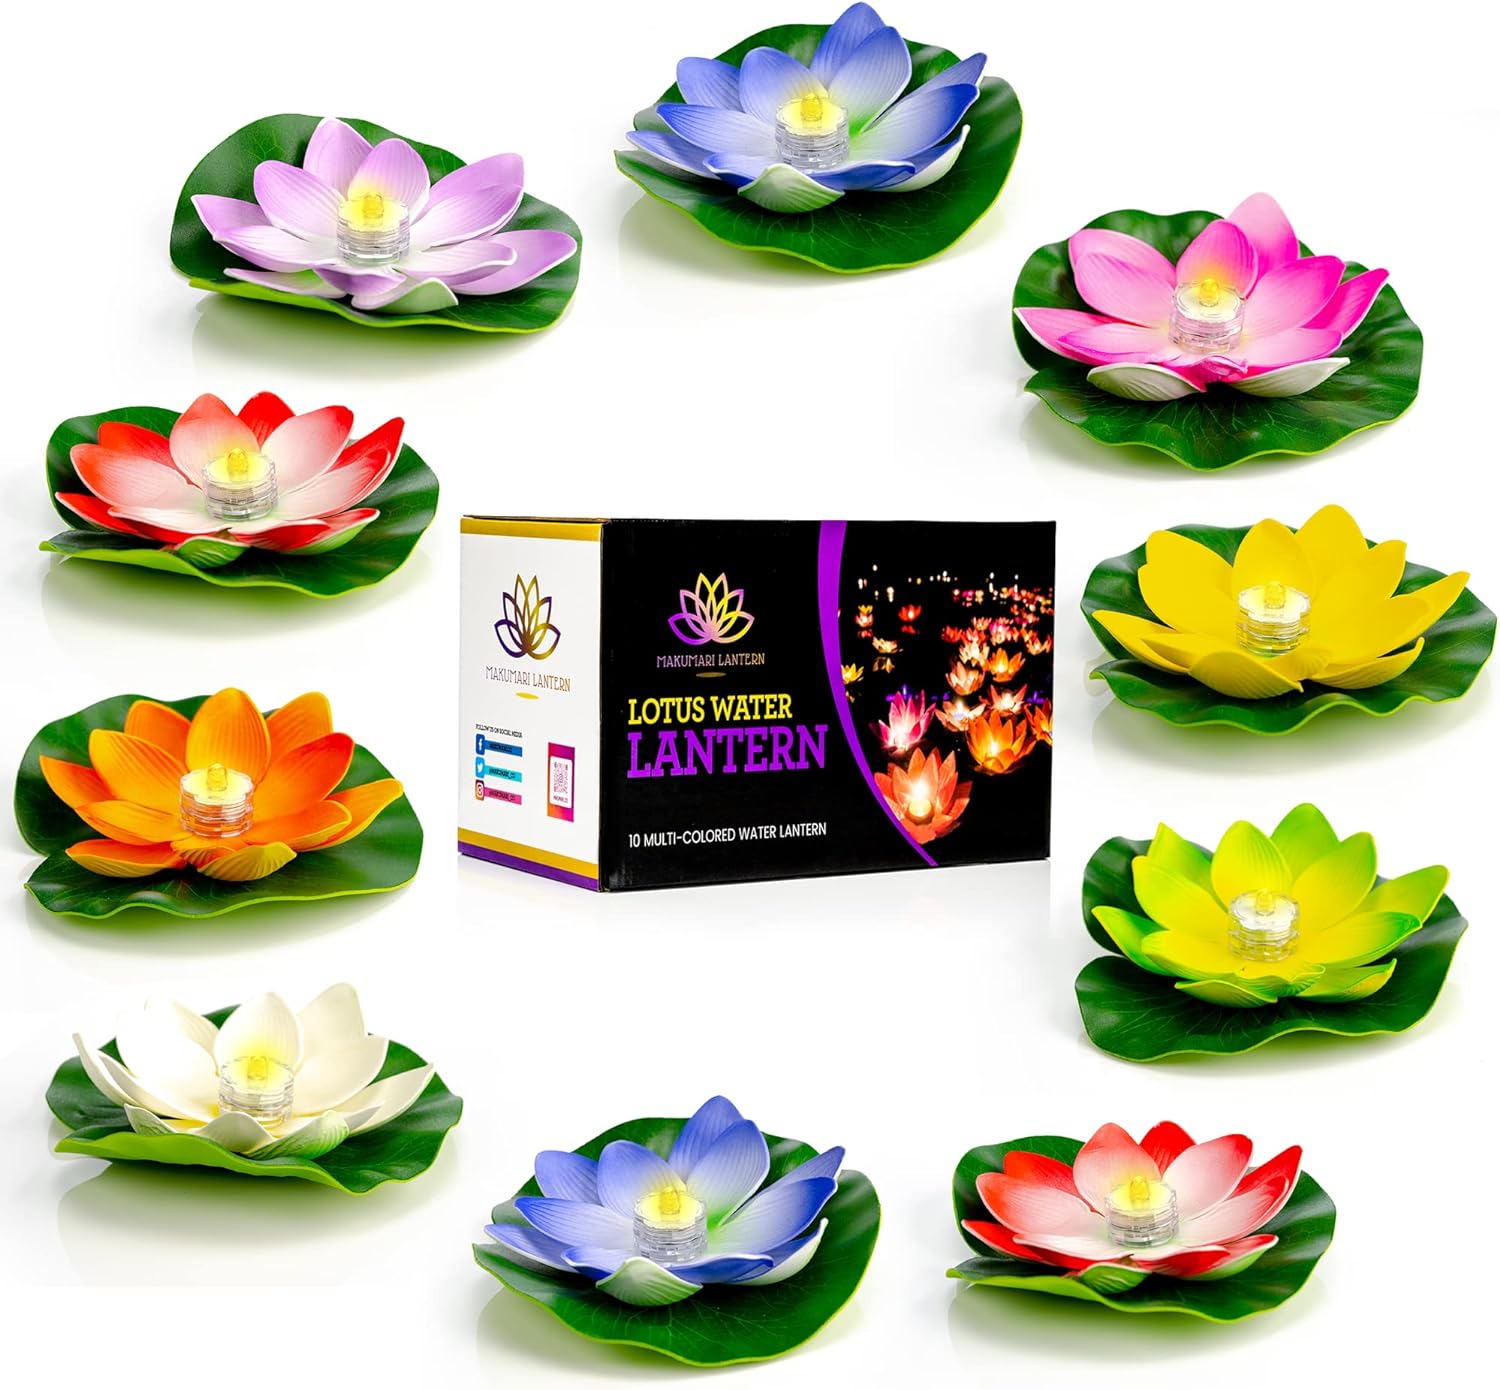 MAKUMARI Lotus Floating Lanterns- Set of 10 Beautiful Large 7 inch Artificial Floating Colorful Lotus with LED Lights for Your Romantic Decorations, Weddings, Memorials or Pool Decor